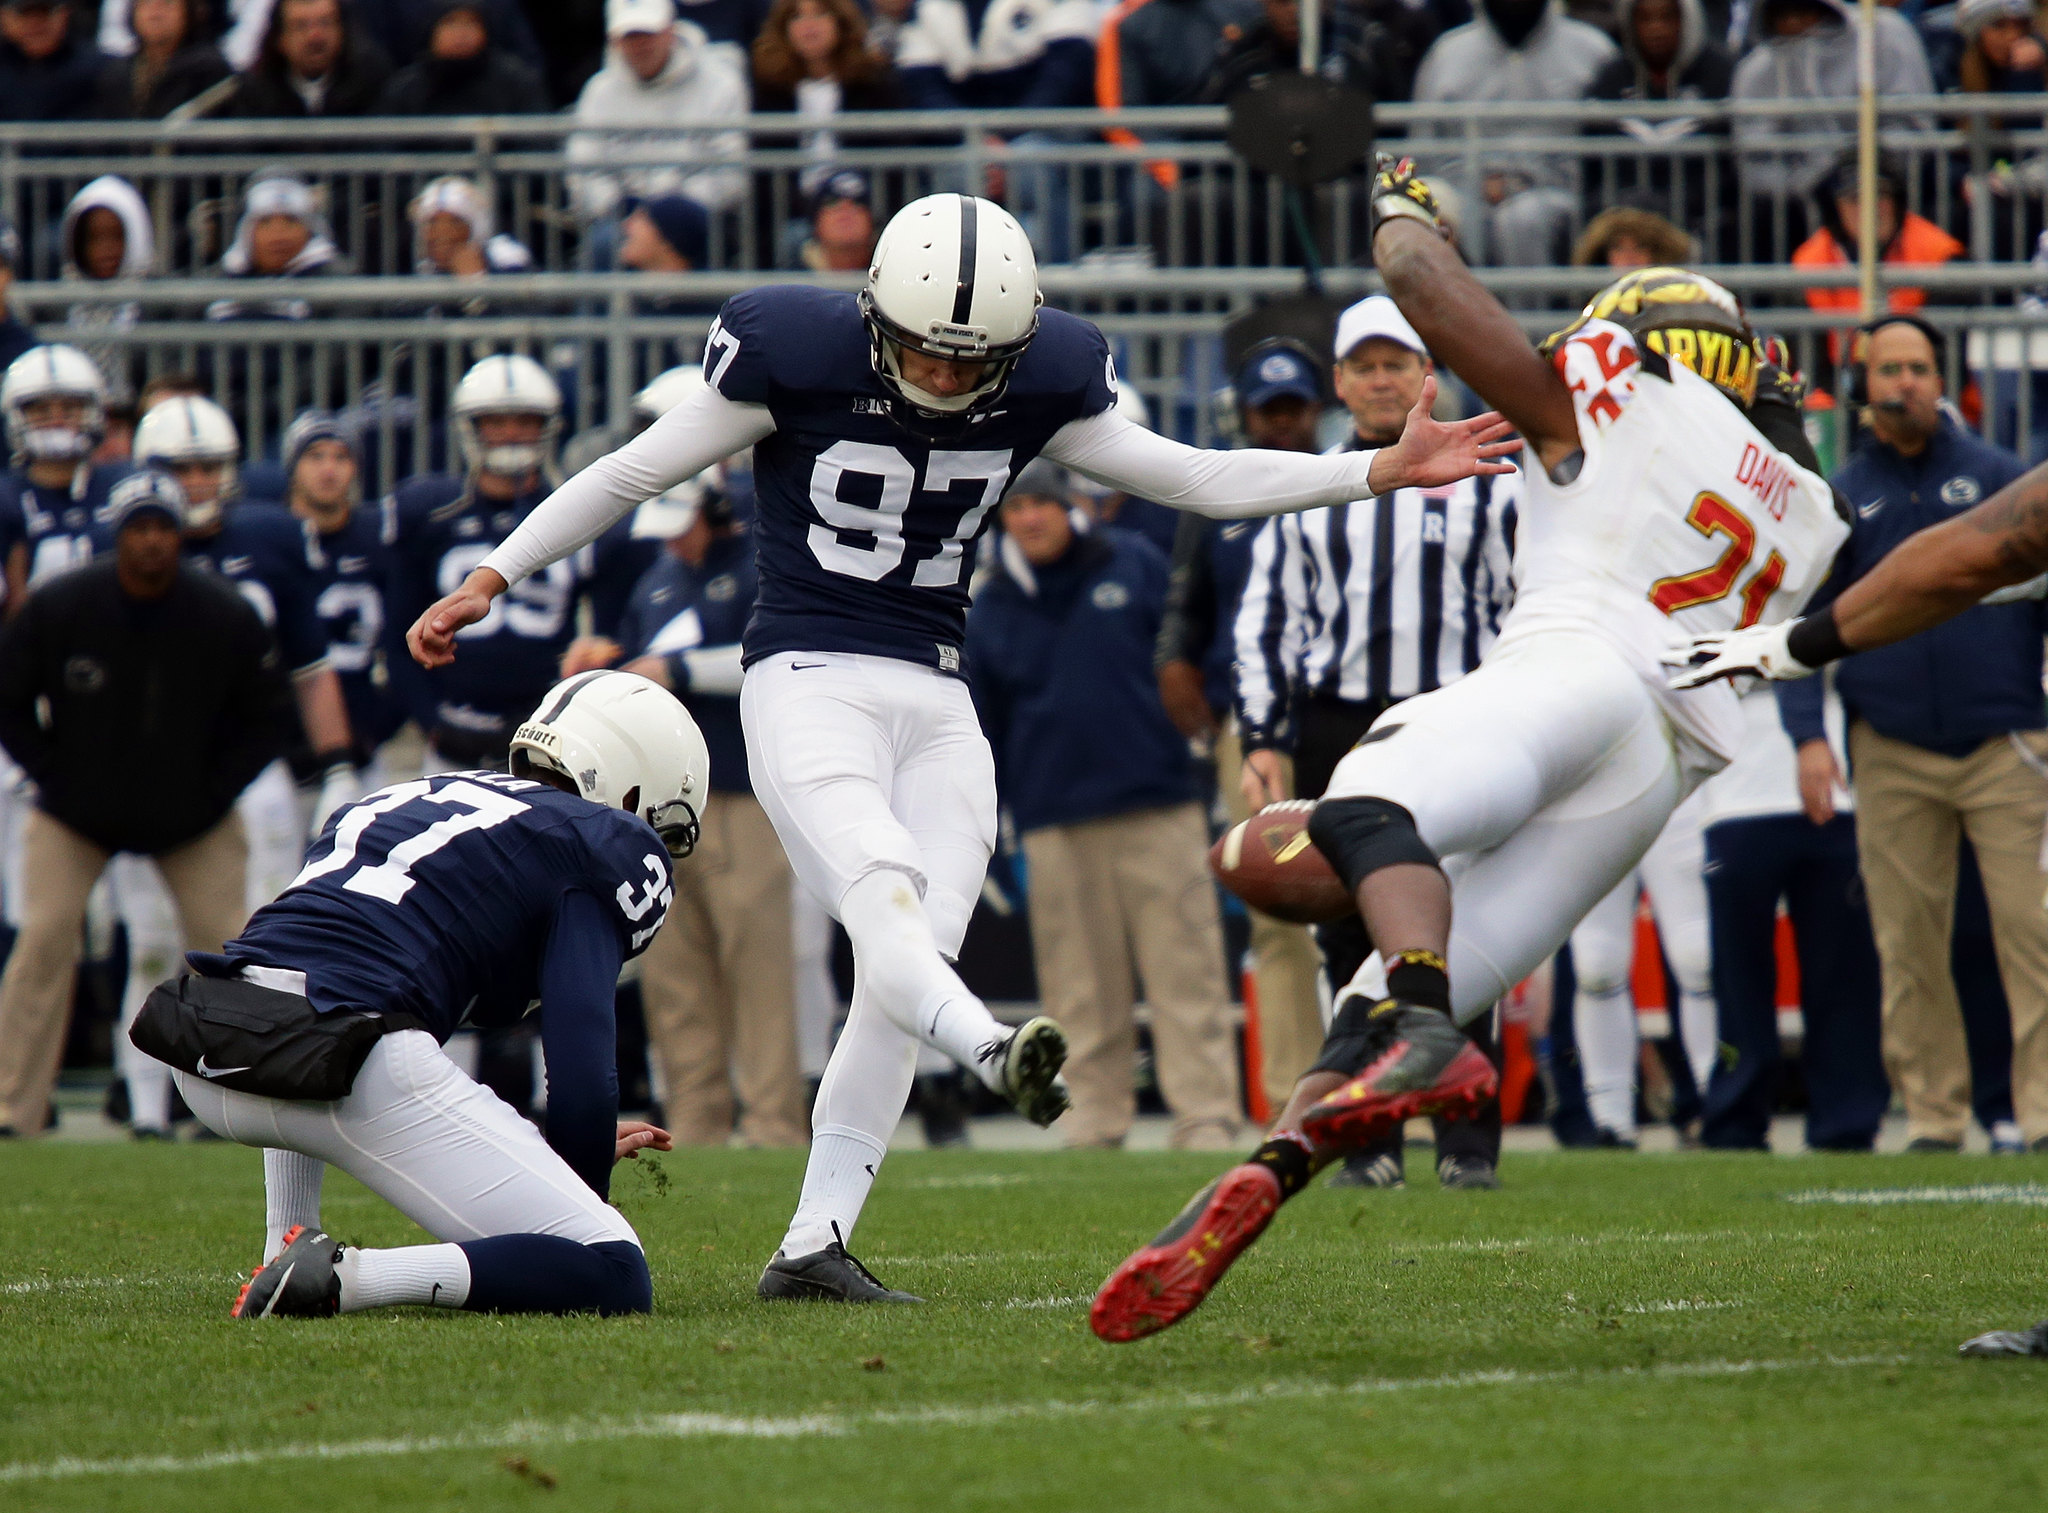 Friday Night College Football Penn State vs Maryland Preview